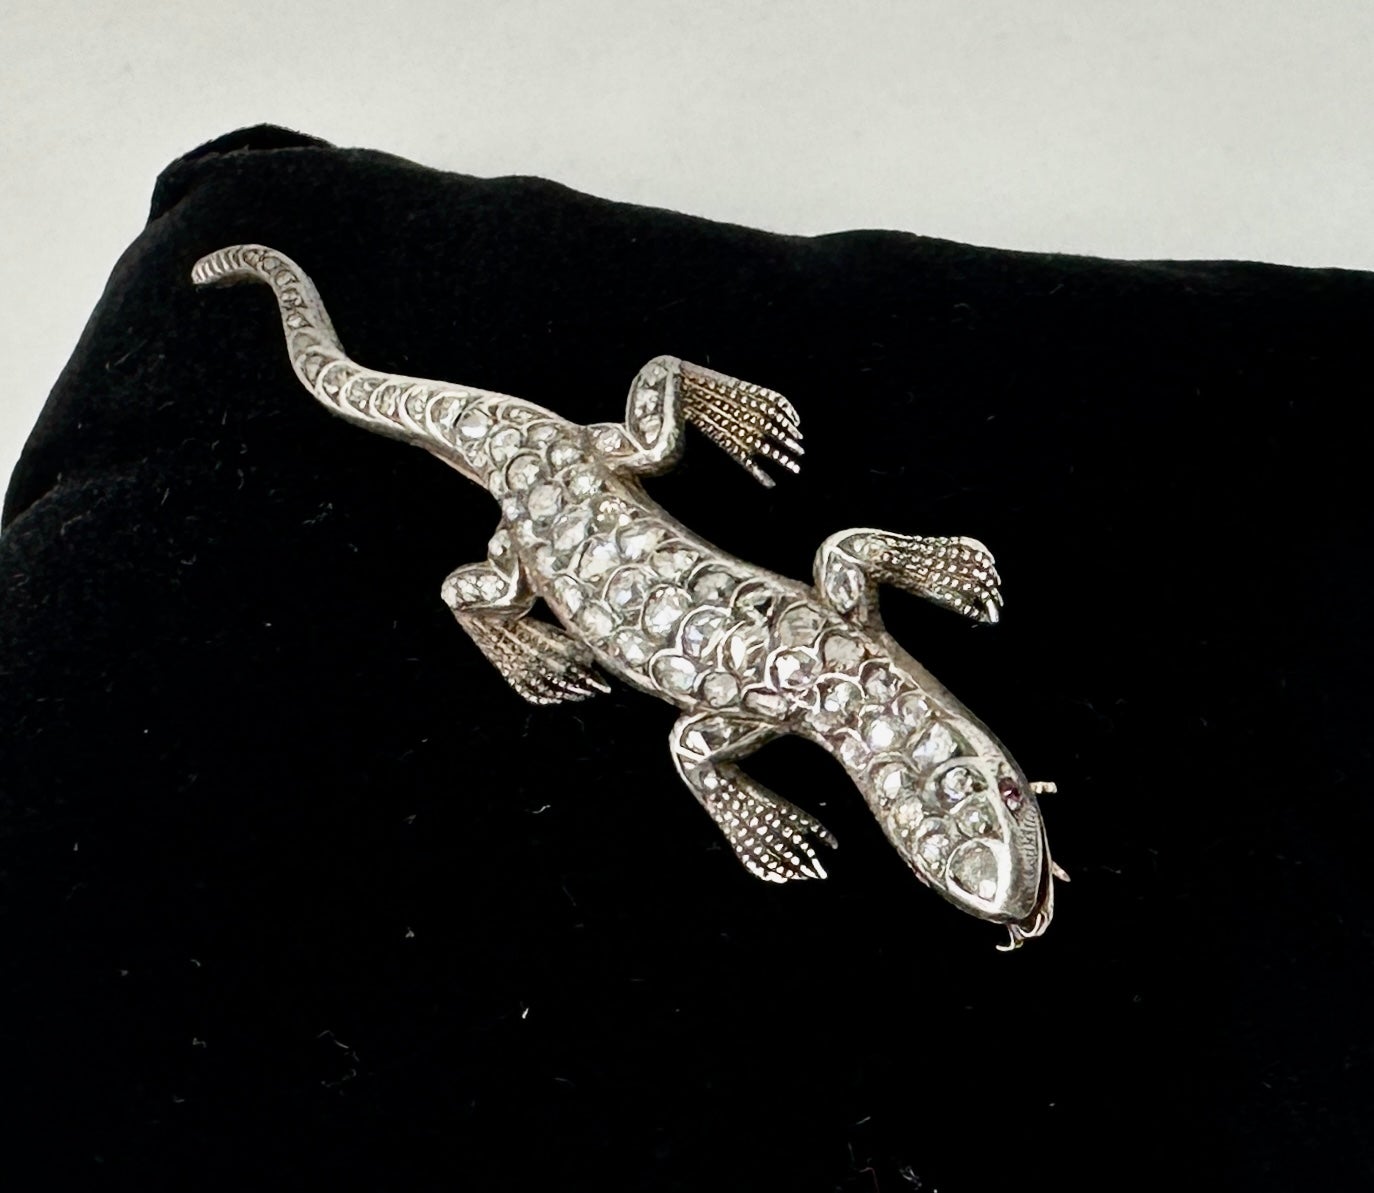 This is a wonderful antique Victorian - Belle Epoque Lizard, Salamander, Chameleon Brooch Pin set throughout with Rose Cut Diamonds in a gorgeous three dimensional design in Silver atop 14 Karat White Gold.  This is one of the most beautiful antique